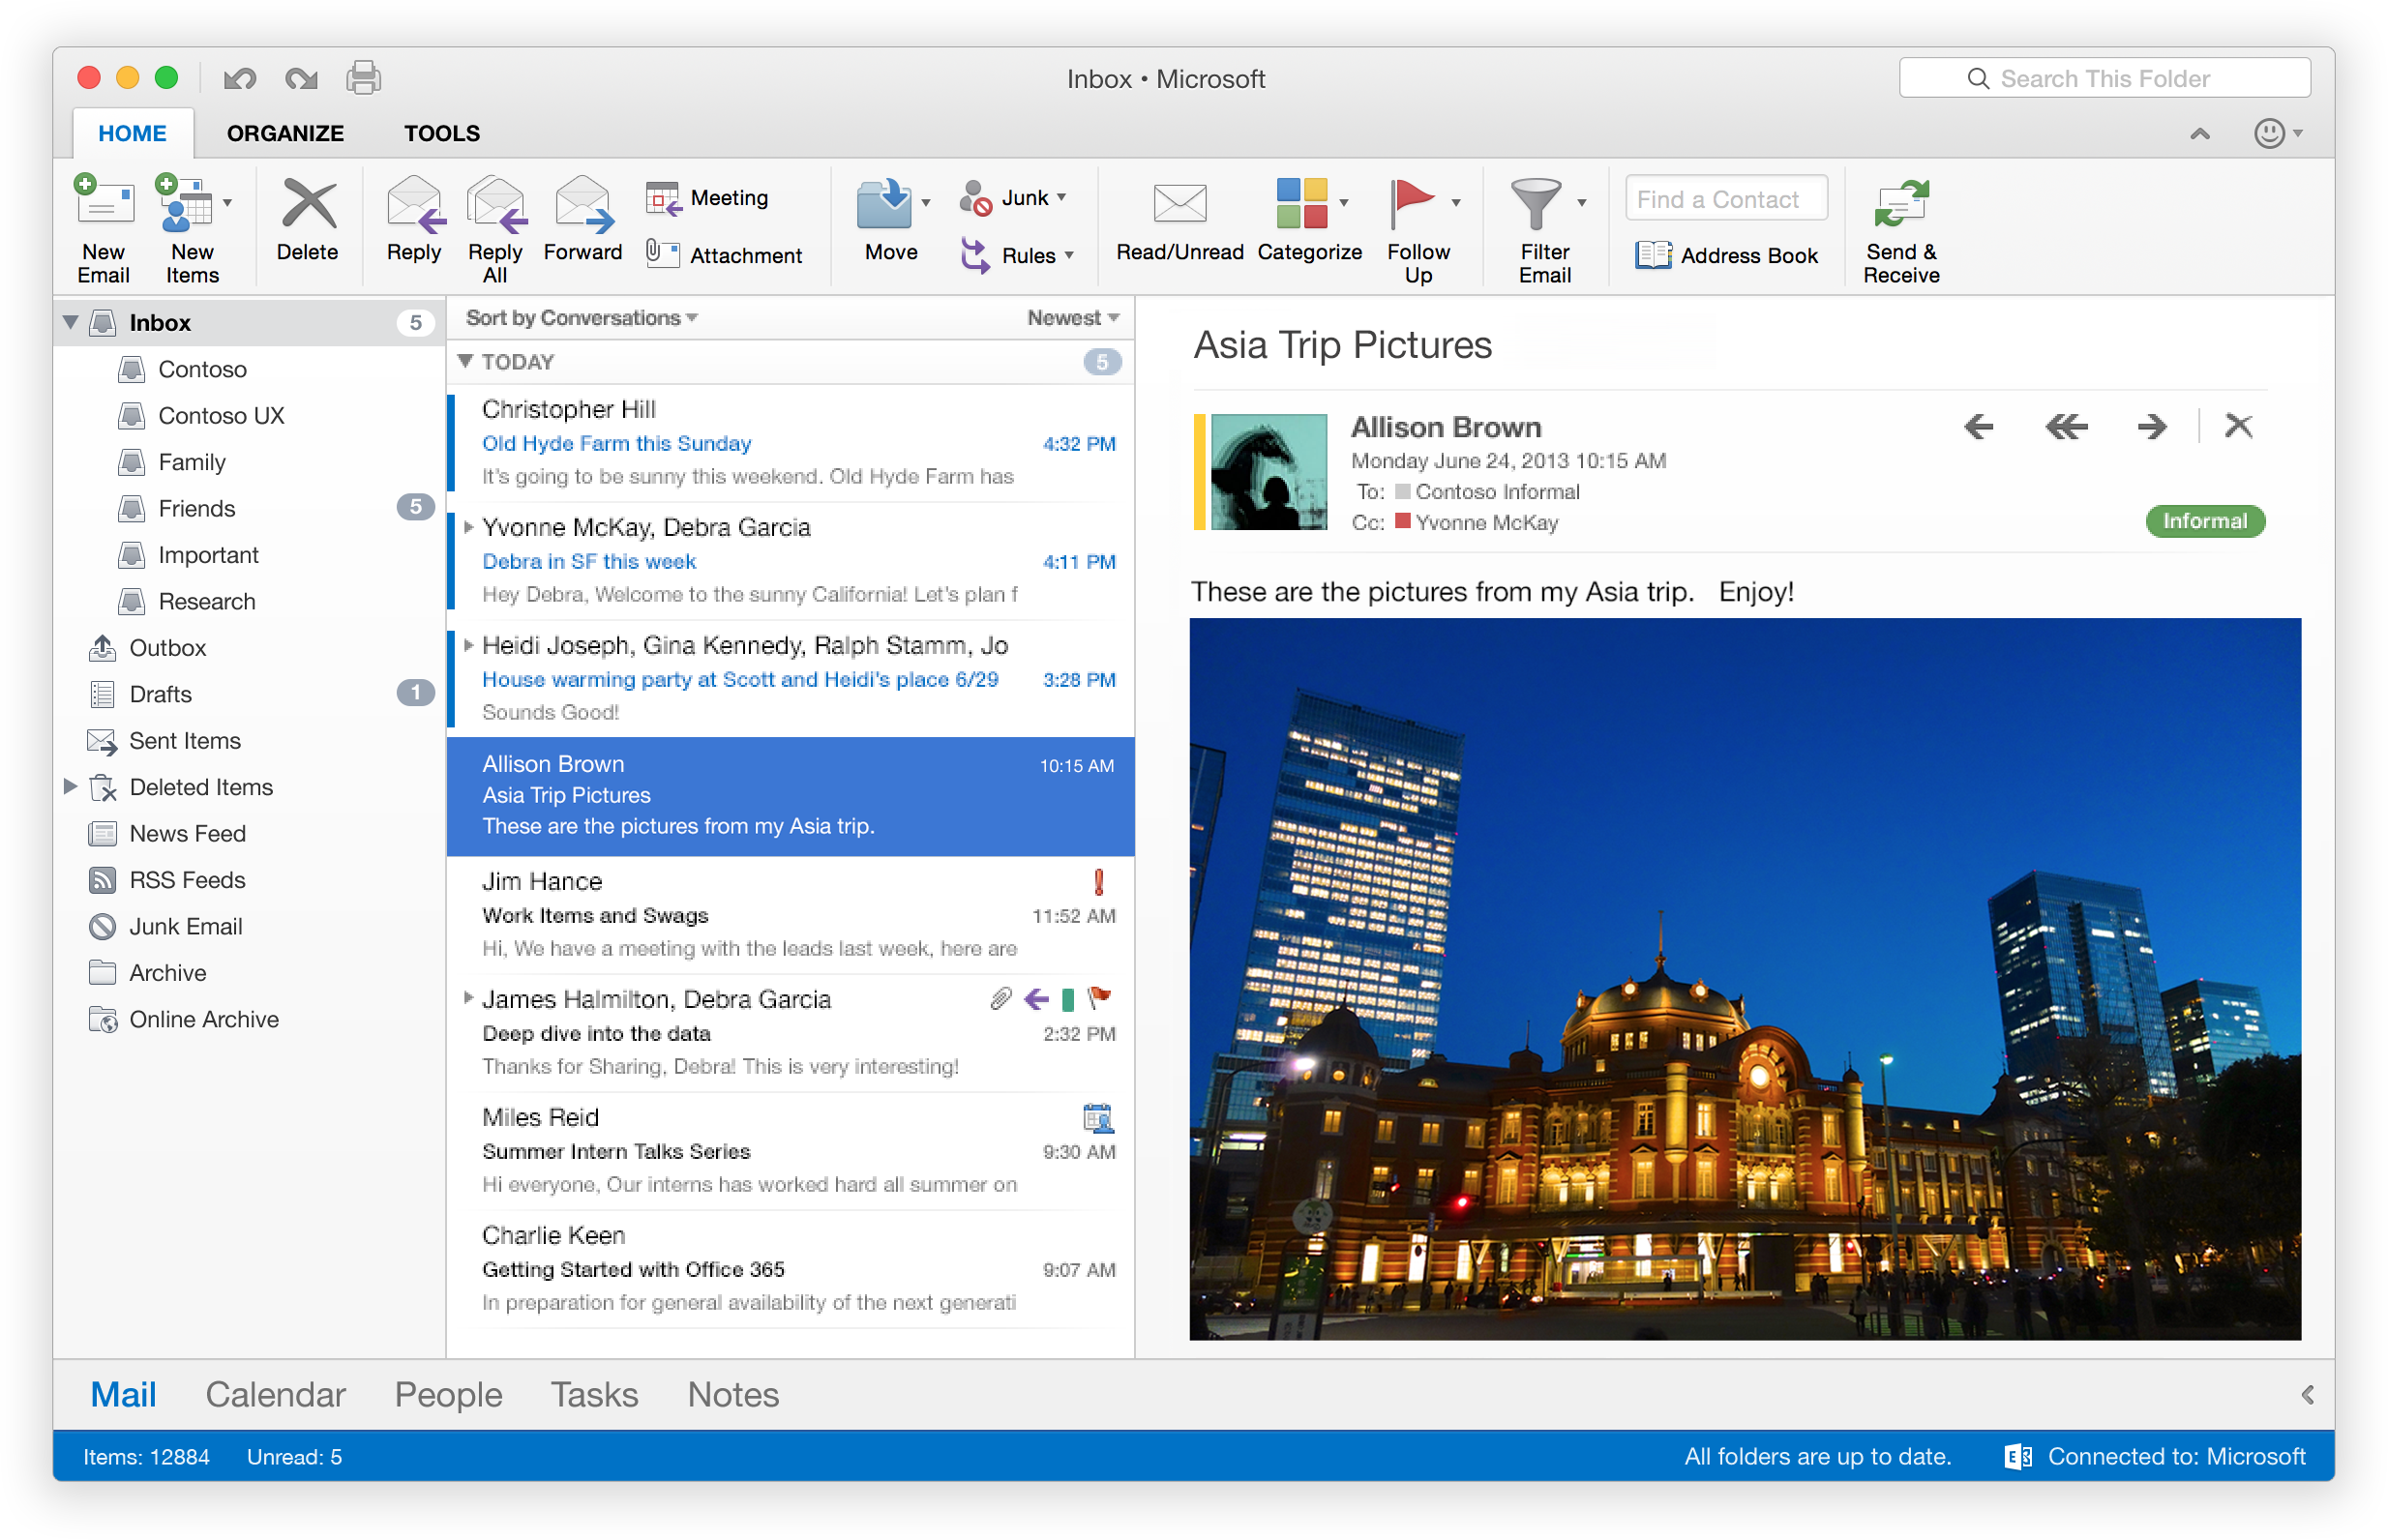 suite migration for microsoft outlook mac